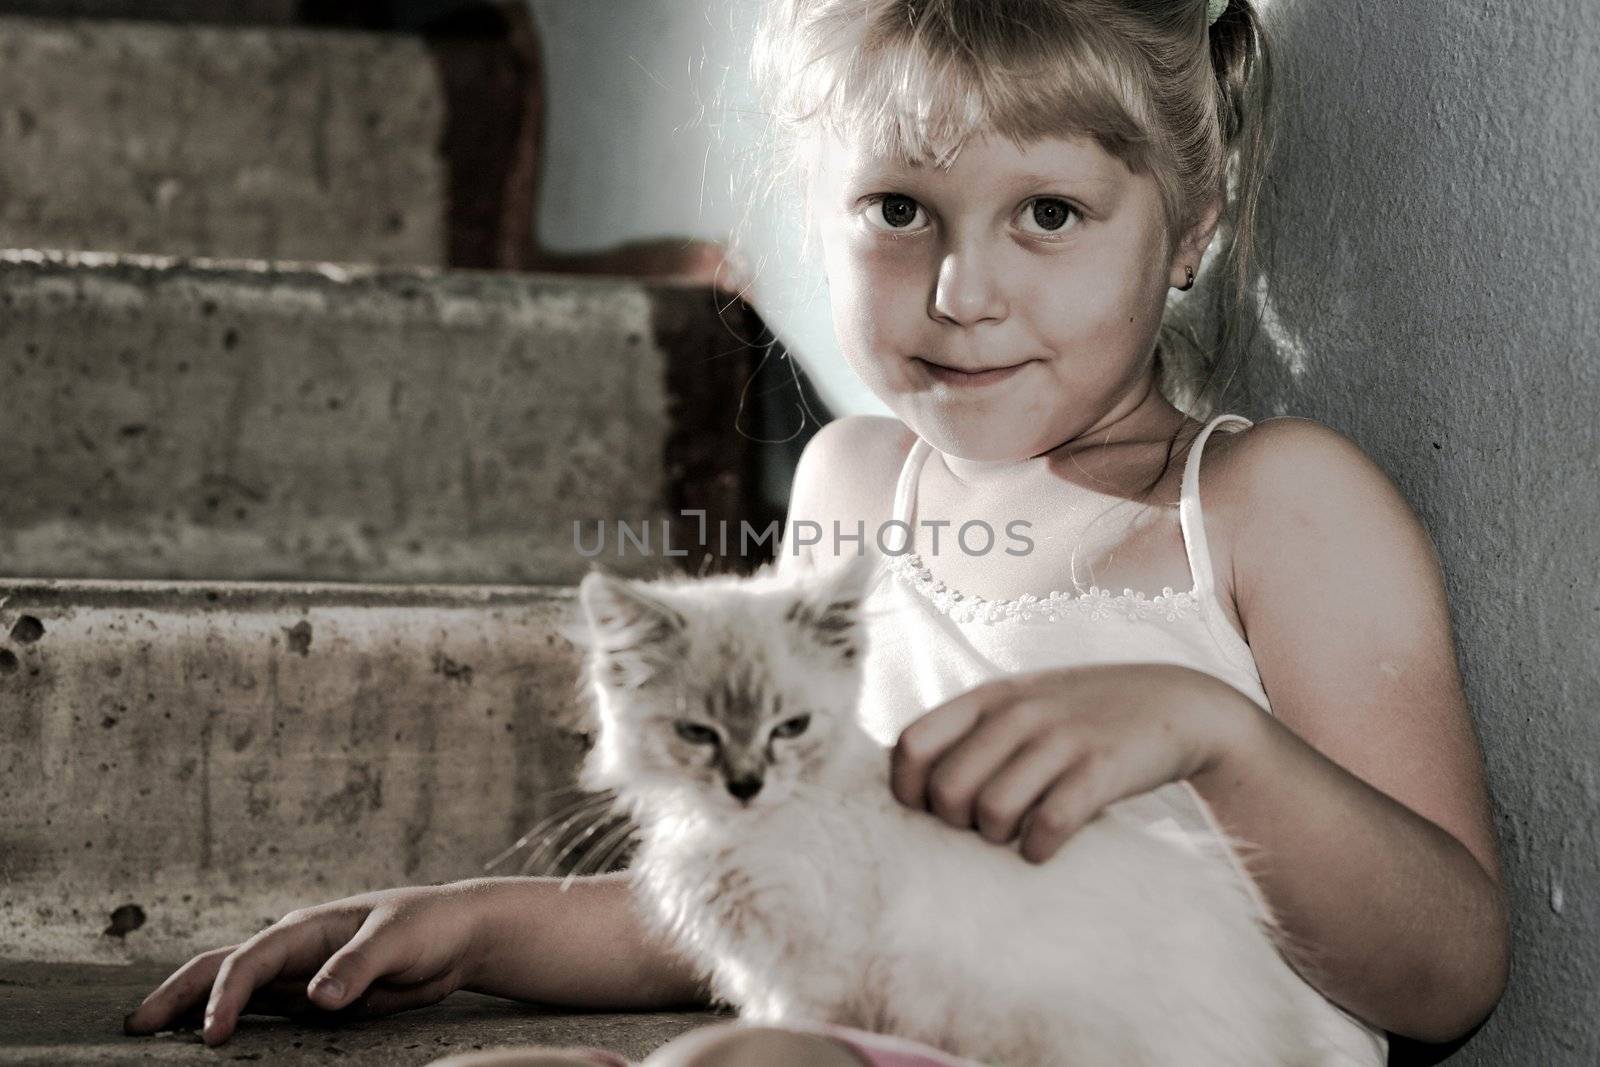 Friends. Smiling girl with a kitten in her arms